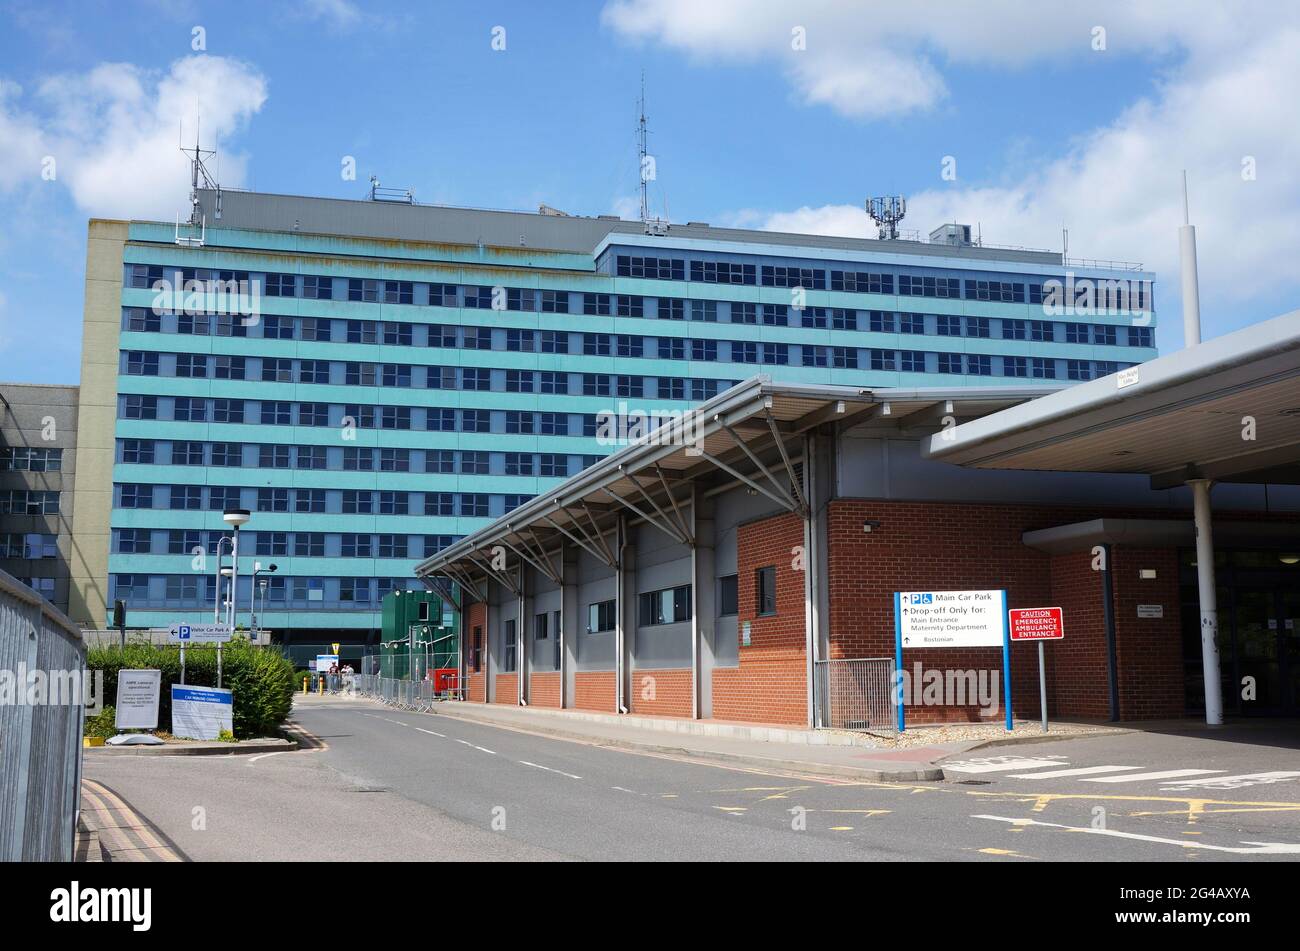 The front of the multi-story NHS Pilgrim hospital on a sunny summer's day Stock Photo